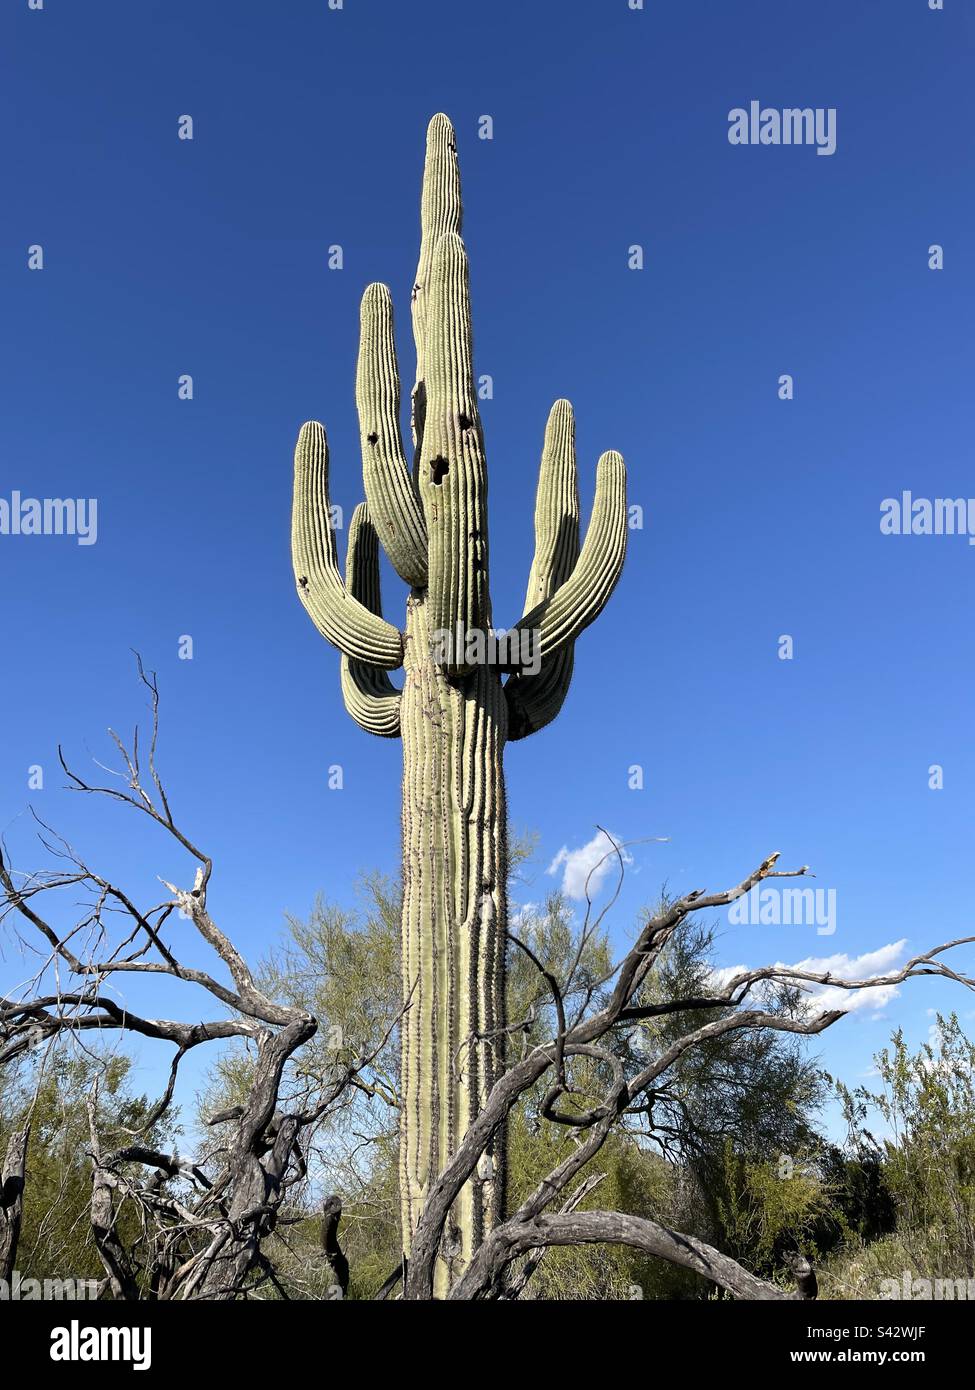 Giant six arm Saguaro cactus towering into brilliant blue sky, rising like a phoenix from dead branches at its base, Phoenix Mountains Preserve, 40th Street trailhead, Piestewa Peak, Dreamy Draw, AZ Stock Photo